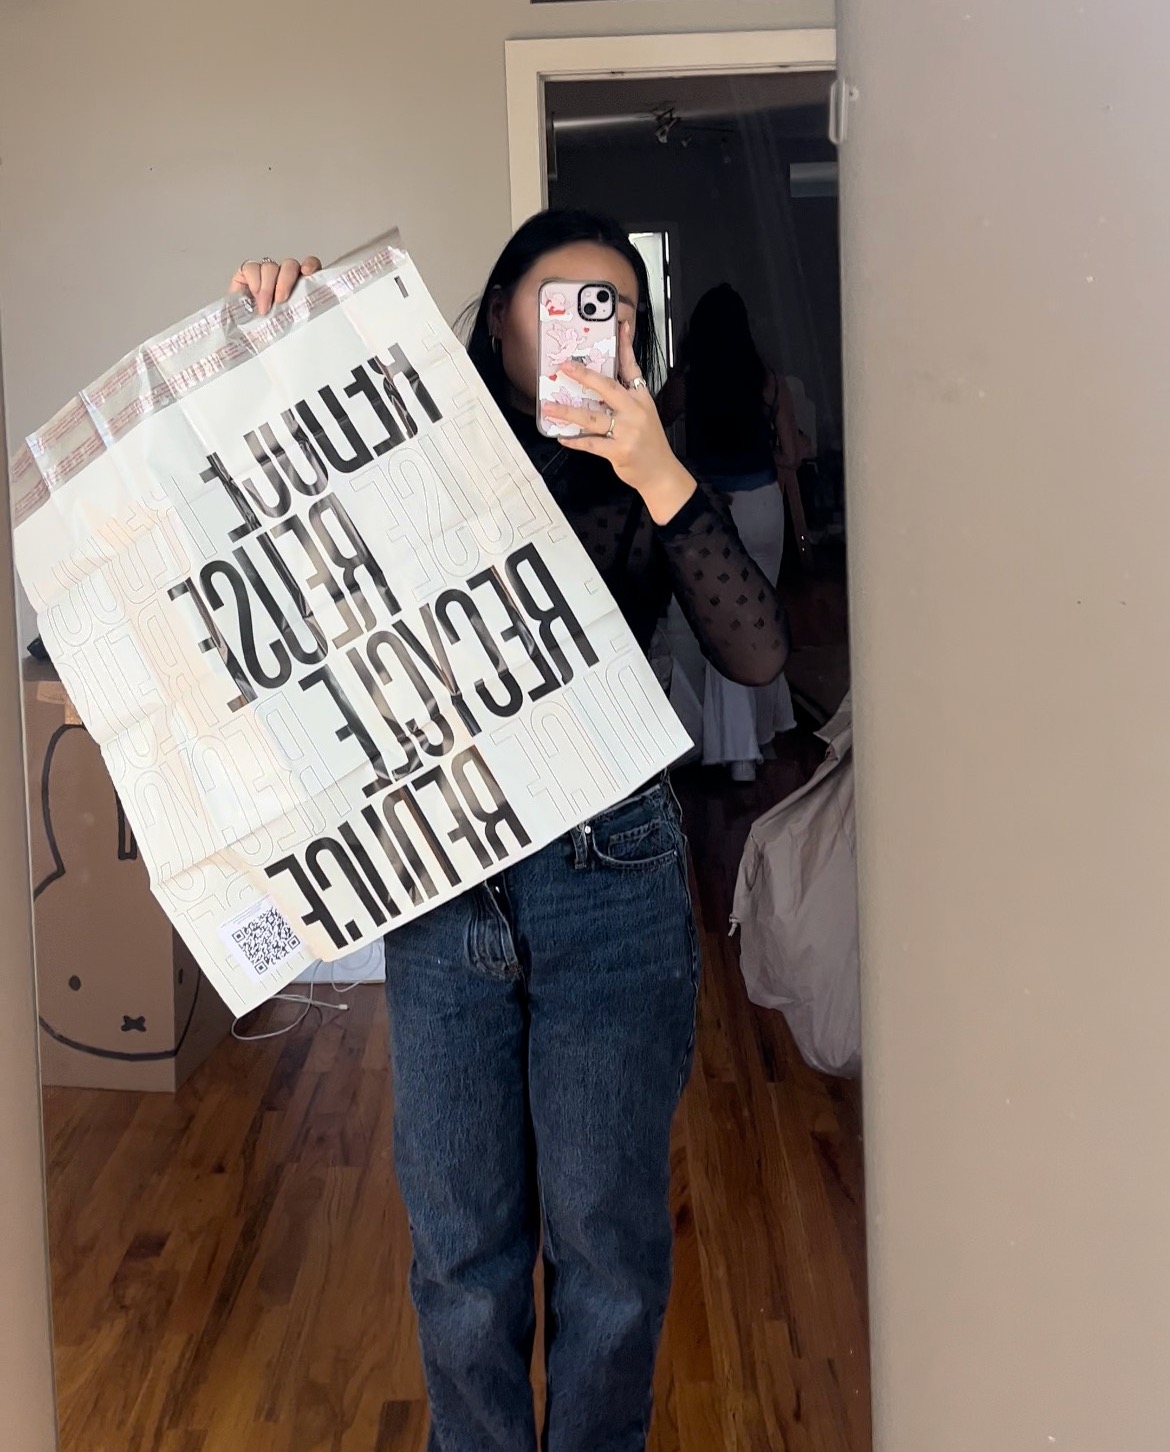 eunice jung poses with her take back bag from for days